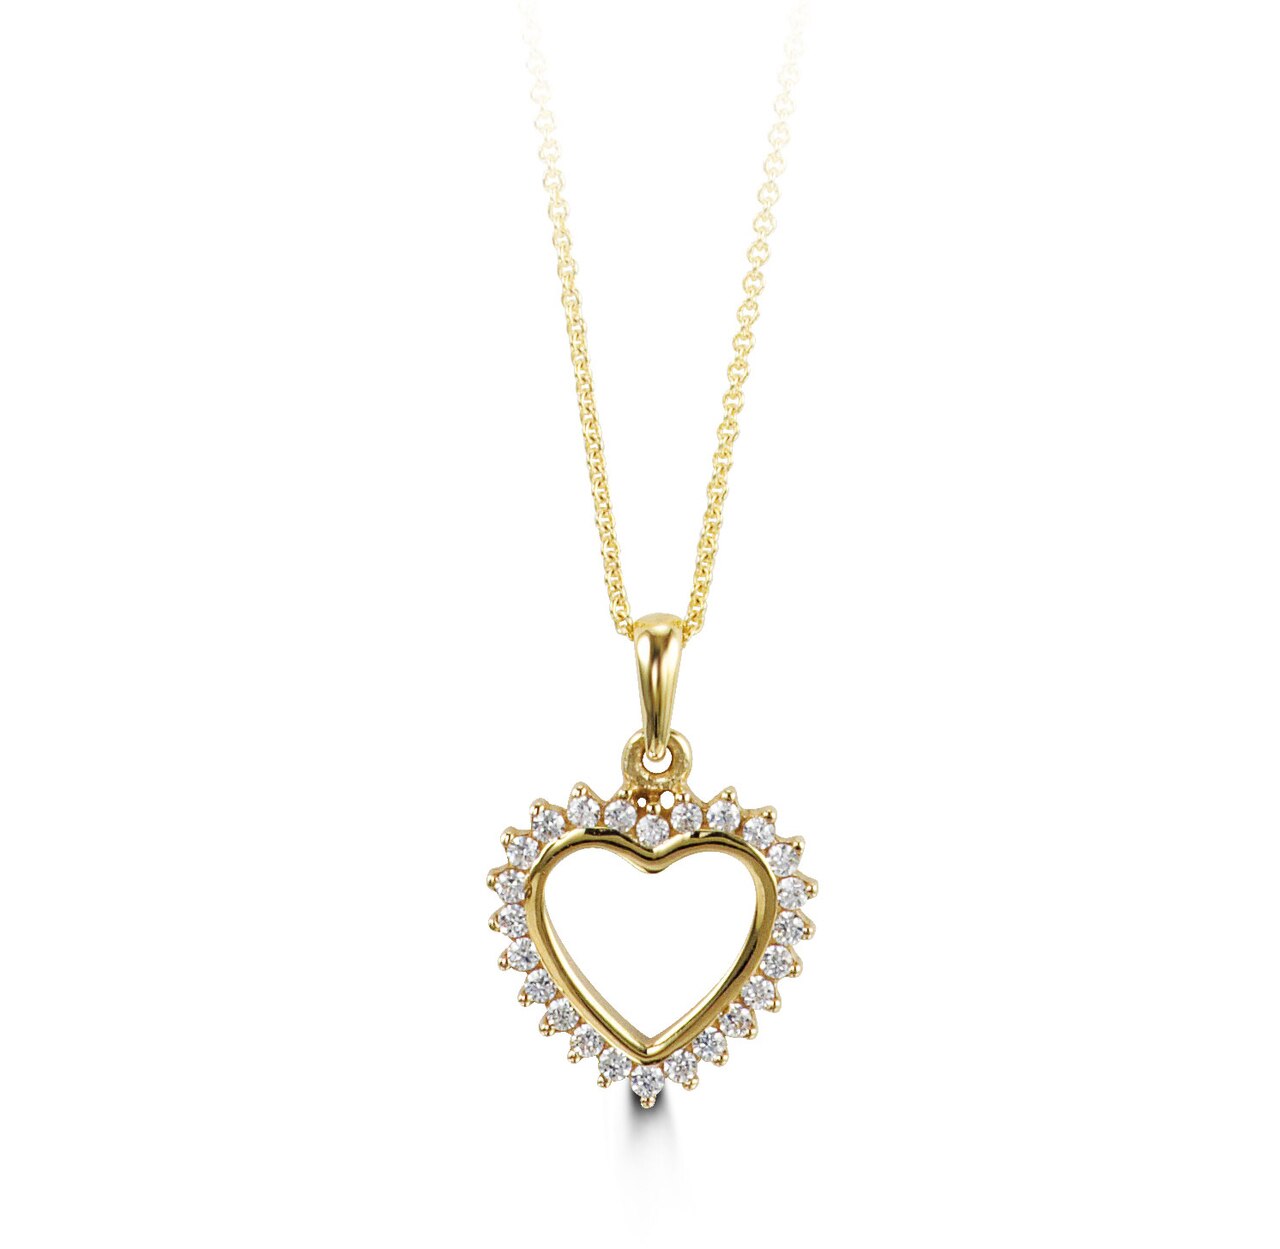 10K Yellow Gold CZ Hear Pendant with Chain